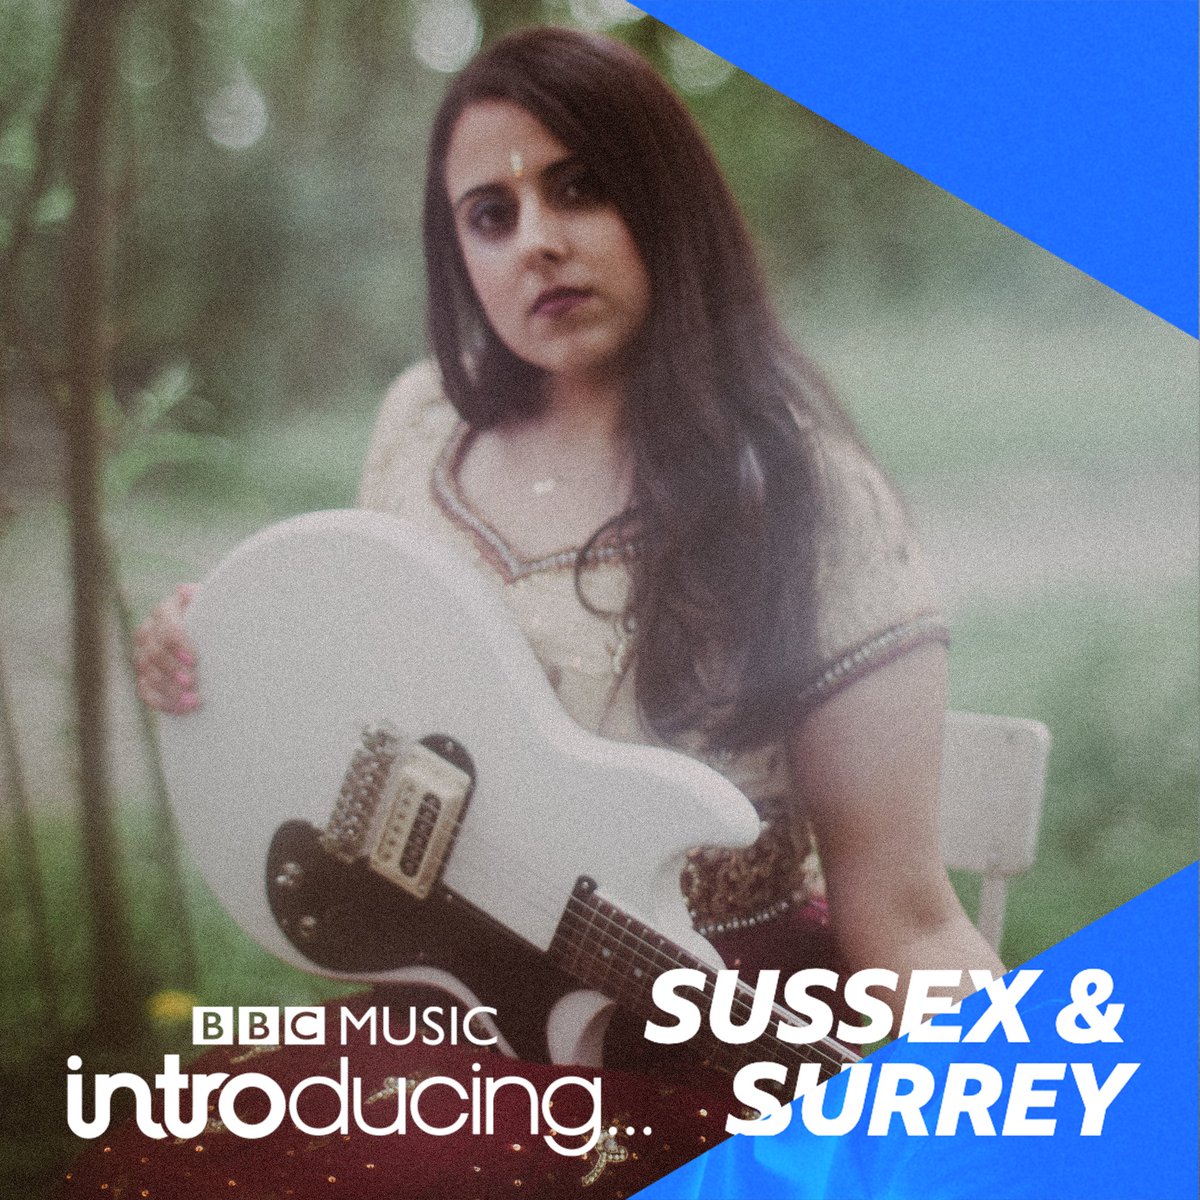 Ahead of me playing @crocroland on Sunday, @MelitaRadio will be playing me on @bbcintroducing tomorrow between 8-10pm! She will be playing @Bugeyeband & @currlsband who are also on the lineup!! So tune in for the ultimate pre-cro cro party bbc.co.uk/sounds/play/li… 📸 by Guy Hurst